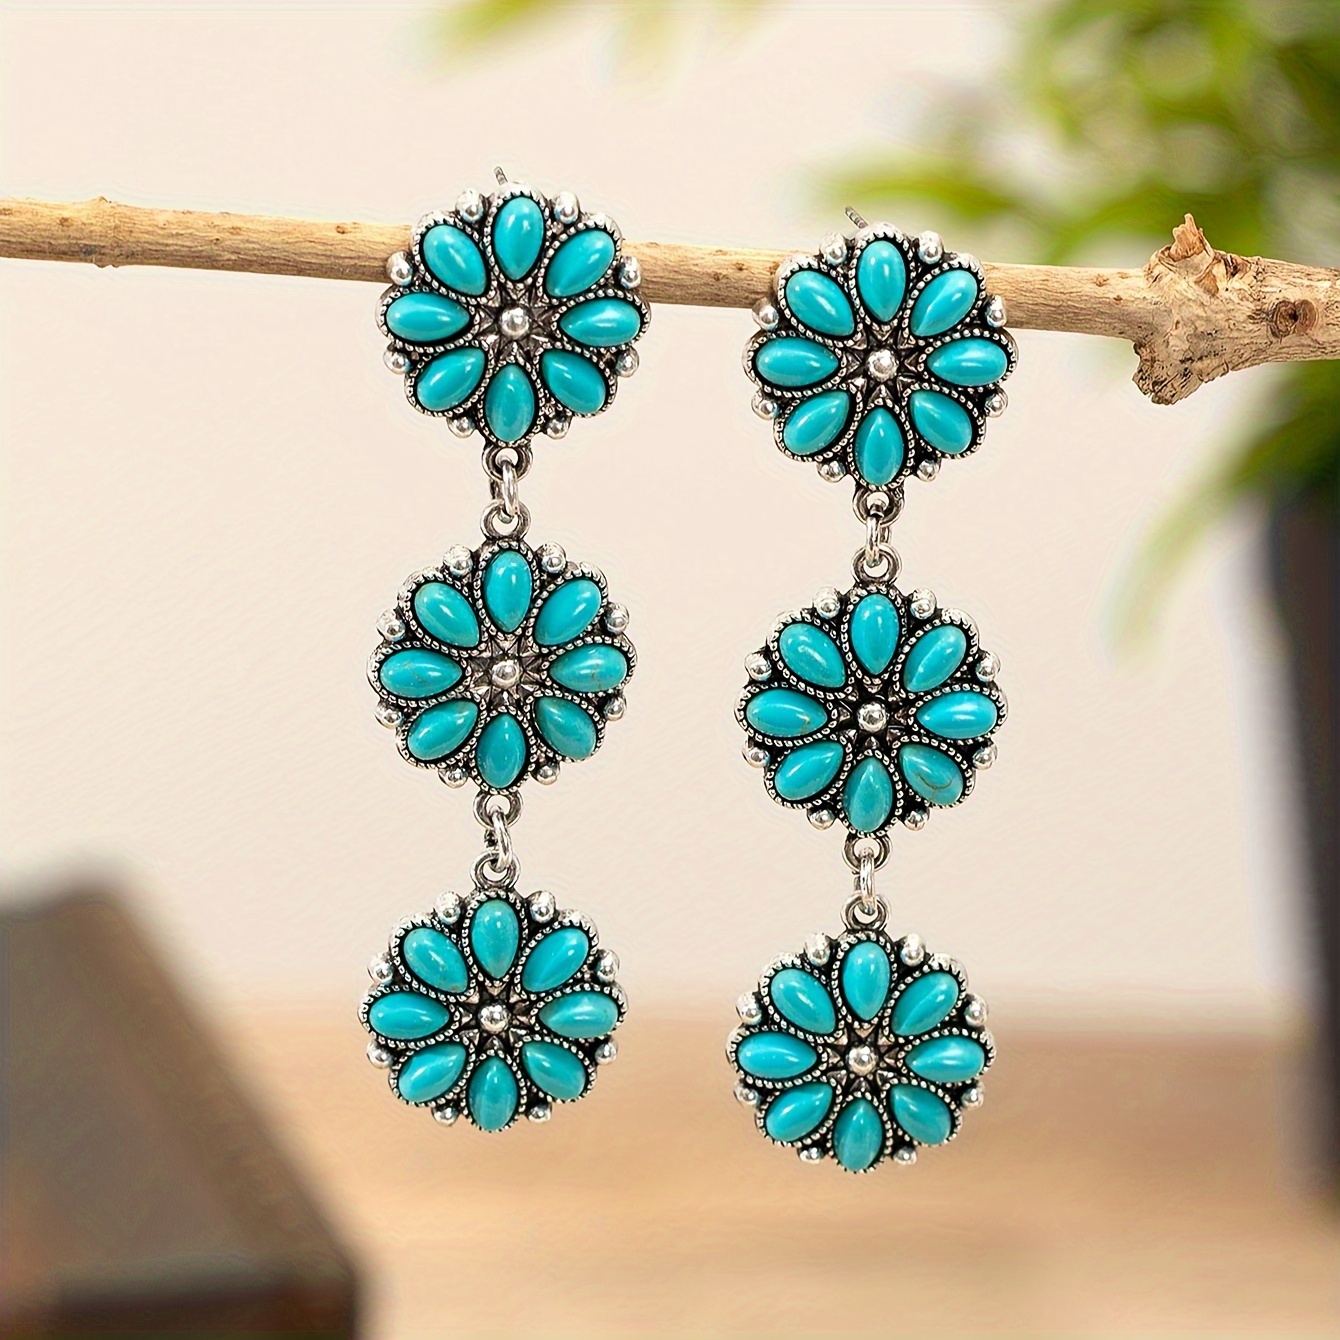 

Bohemian Style Vintage Turquoise Earrings With Silver Charm, Suitable For Everyday Wear And Gift Giving